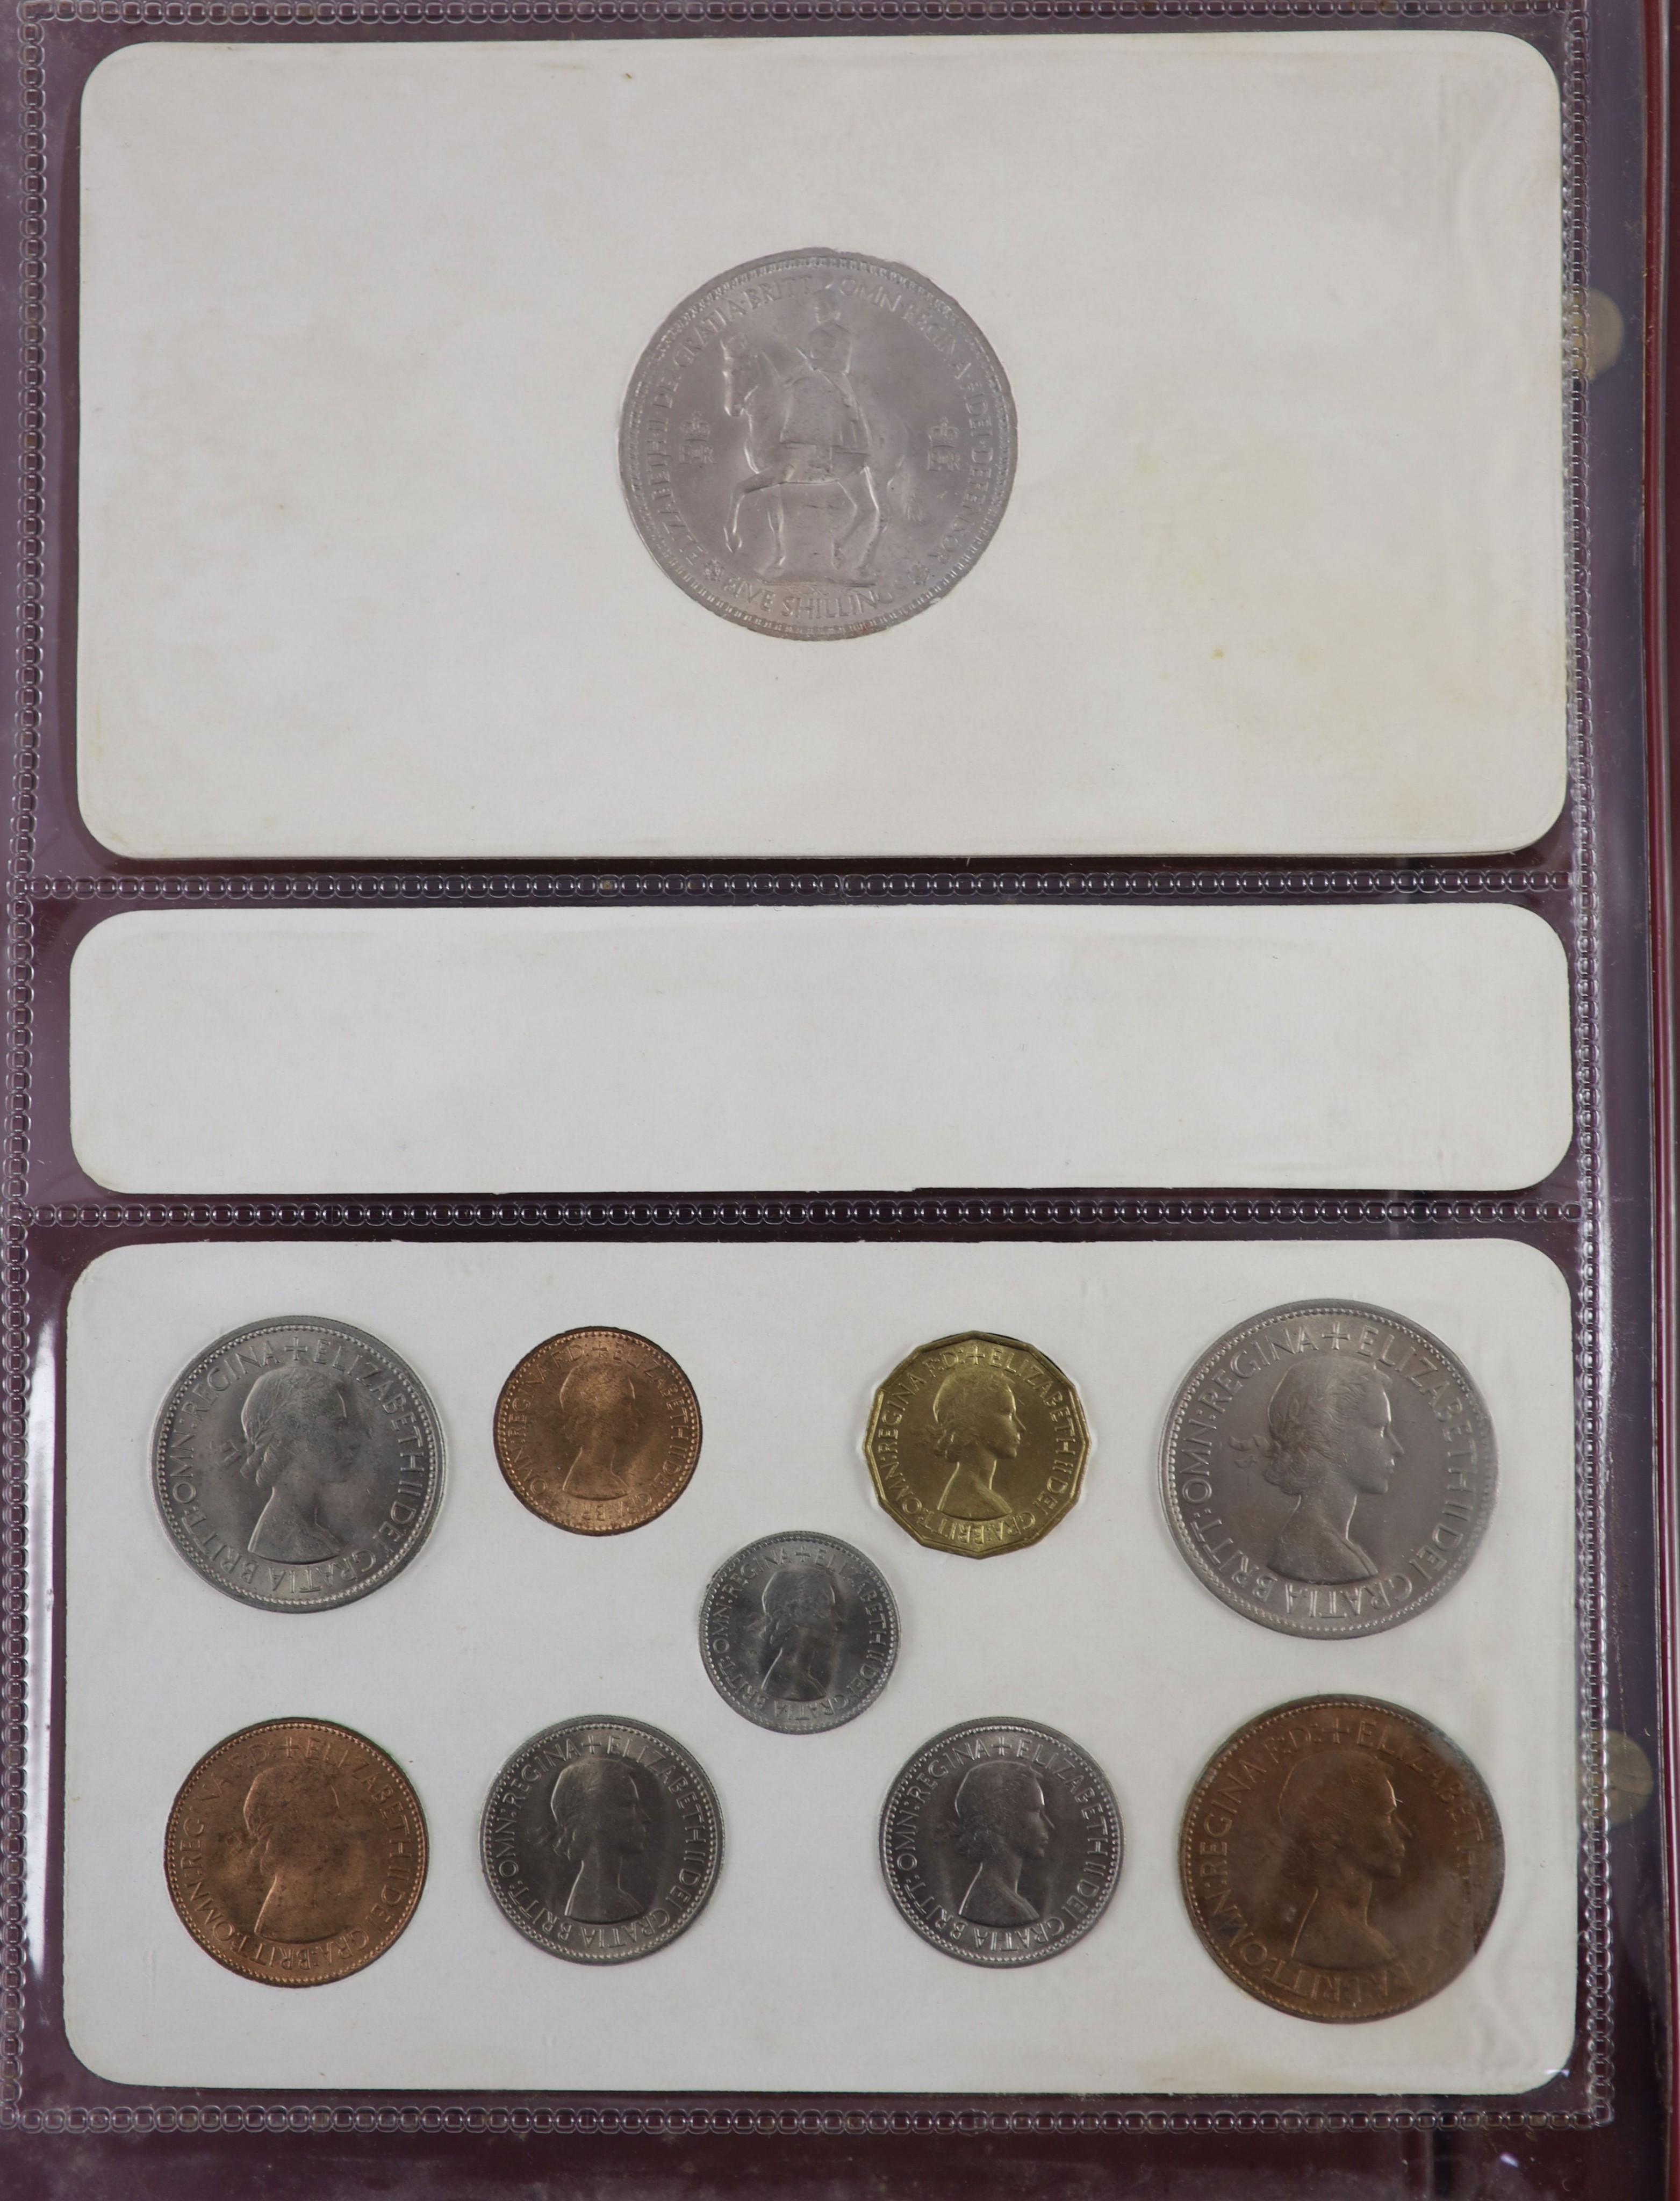 Queen Elizabeth II pre-decimal specimen coin sets for 1953 - 1967, first and second issues, all EF/ - Image 2 of 34